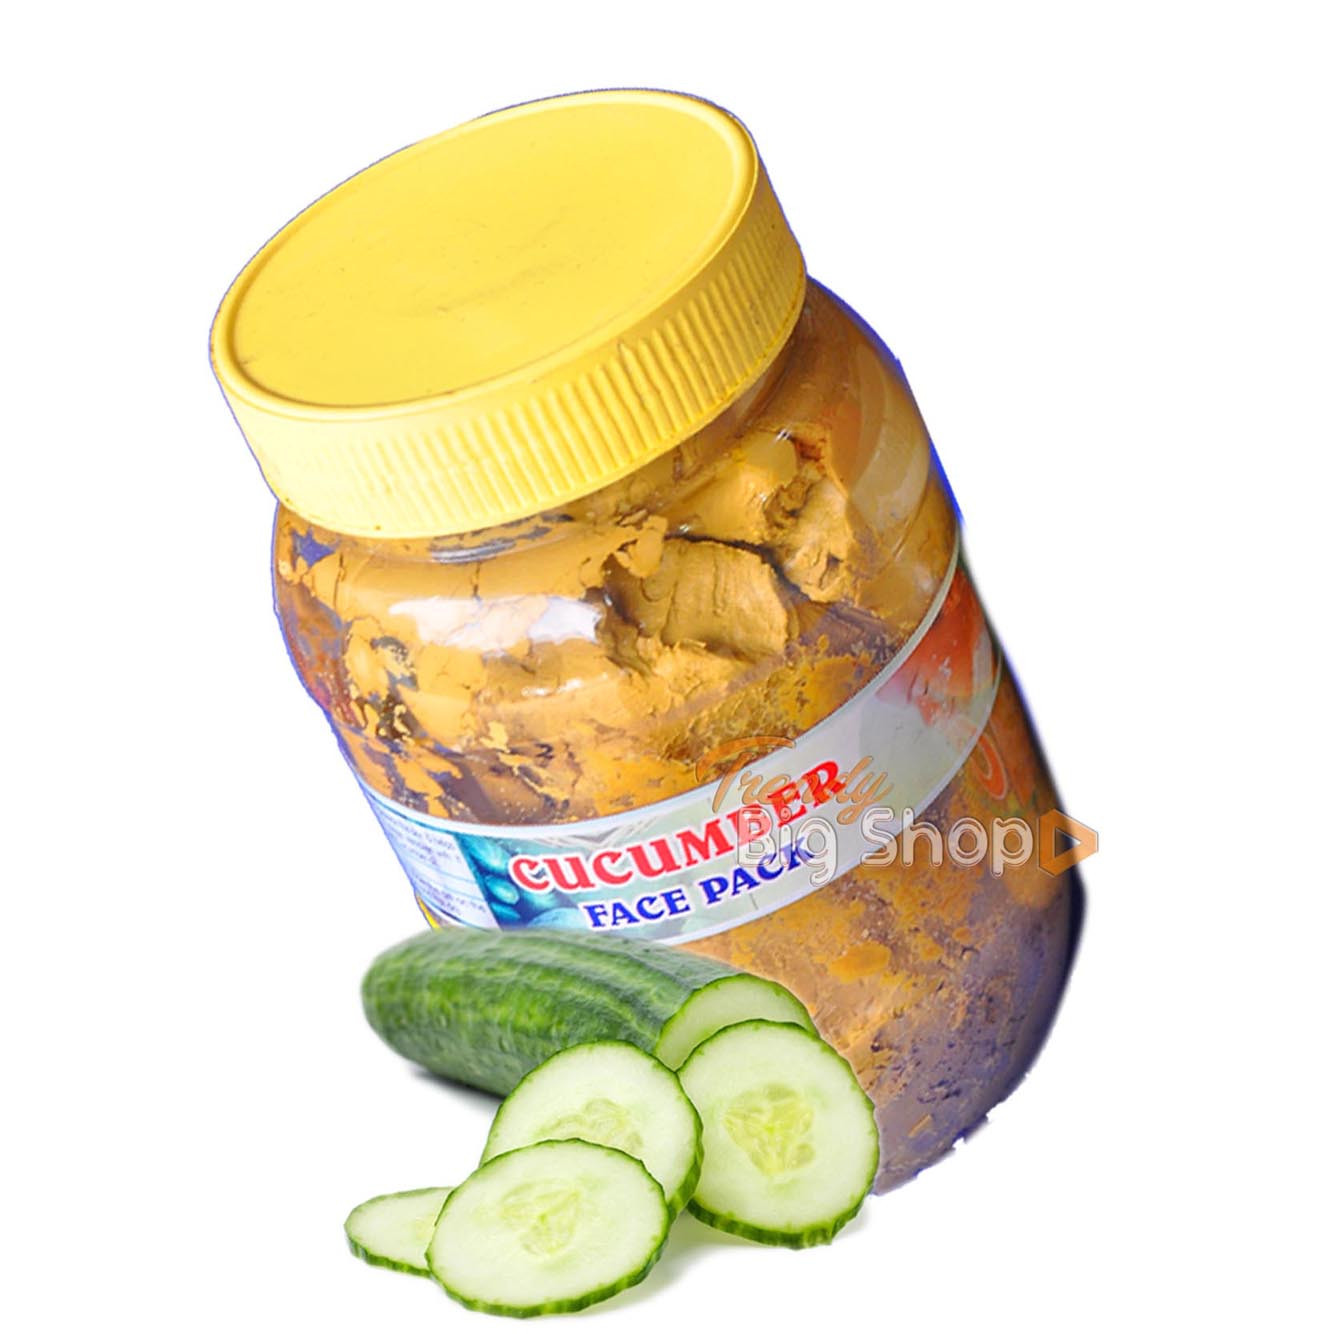 Cucumber face pack Powder 250gm, Natural Face pack powder online store